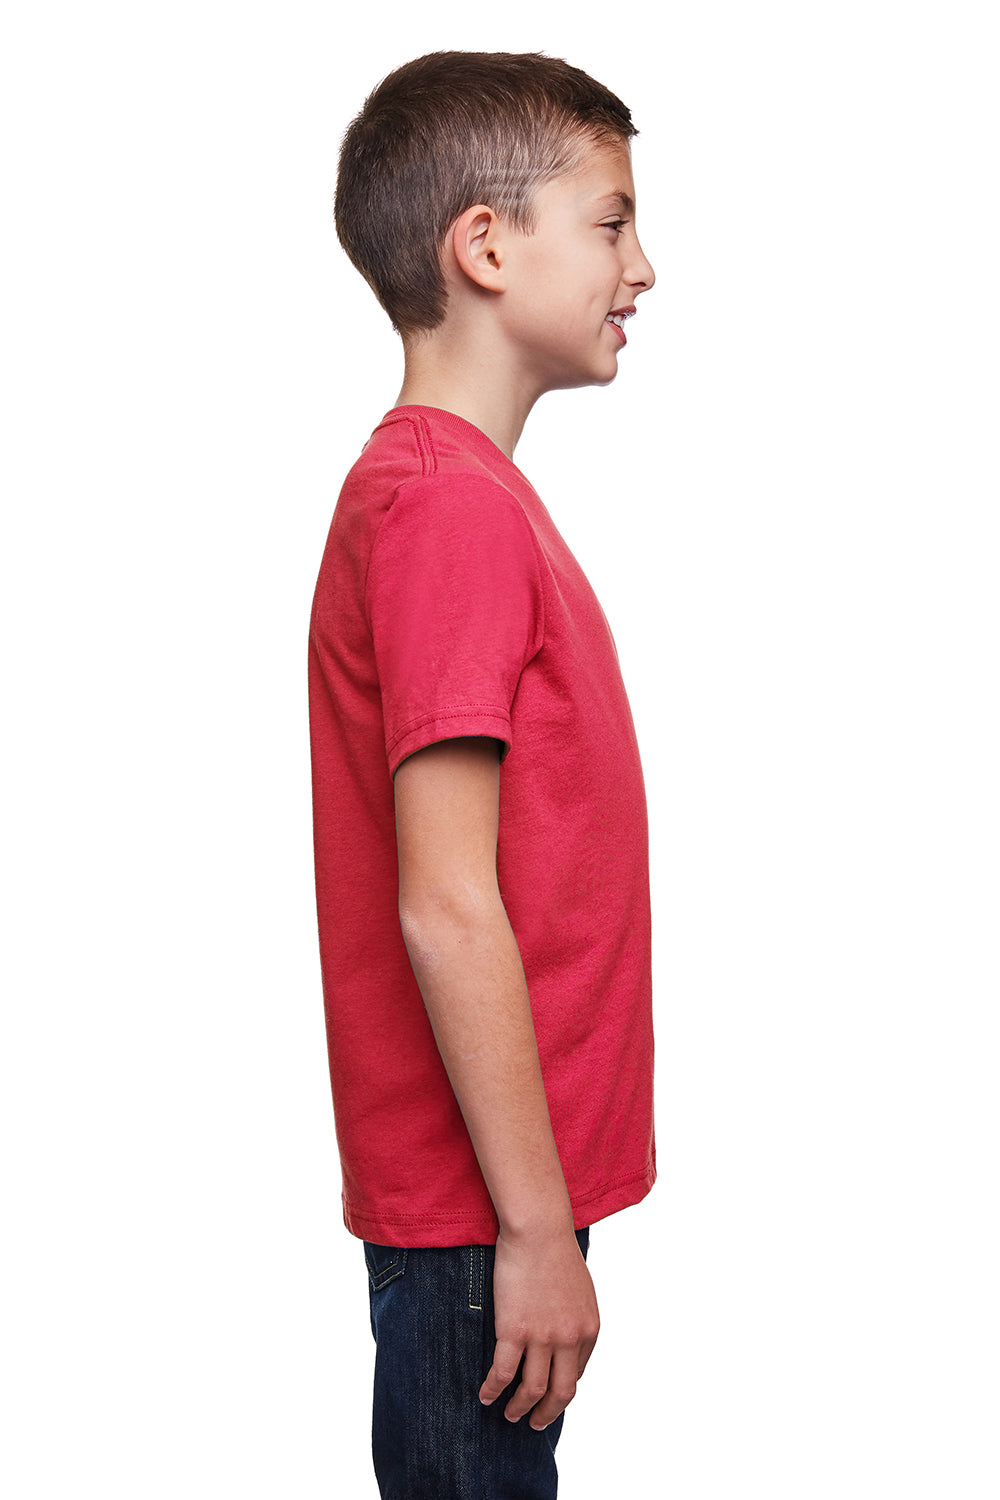 Next Level 4212 Youth Eco Performance Moisture Wicking Short Sleeve Crewneck T-Shirt Heather Red Side